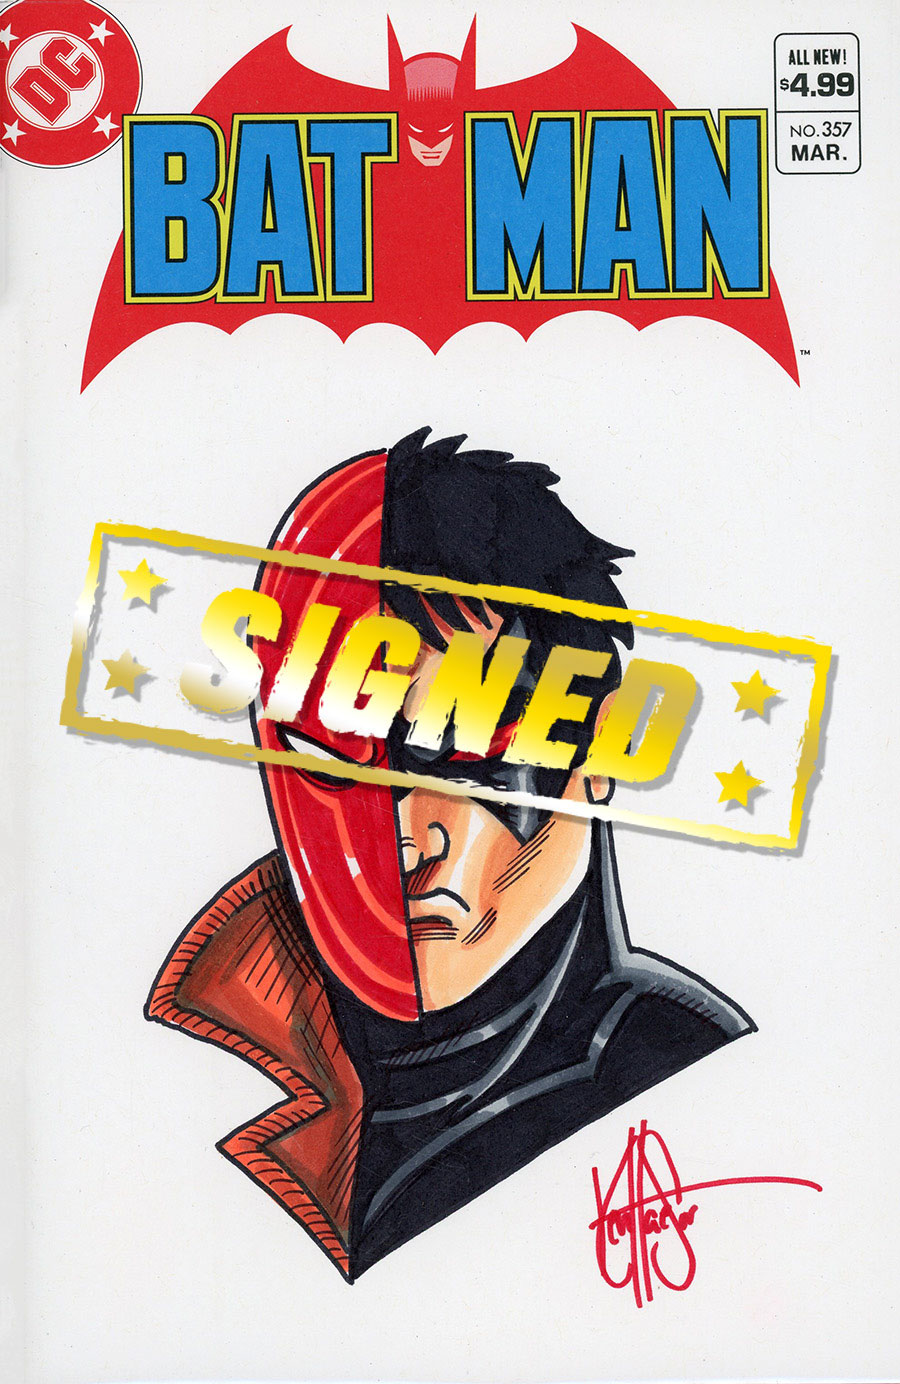 Batman #357 Facsimile Edition Cover F DF Blank Commissioned Cover Art Signed & Remarked By Ken Haeser With A Jason Todd / Red Hood Hand-Drawn Sketch